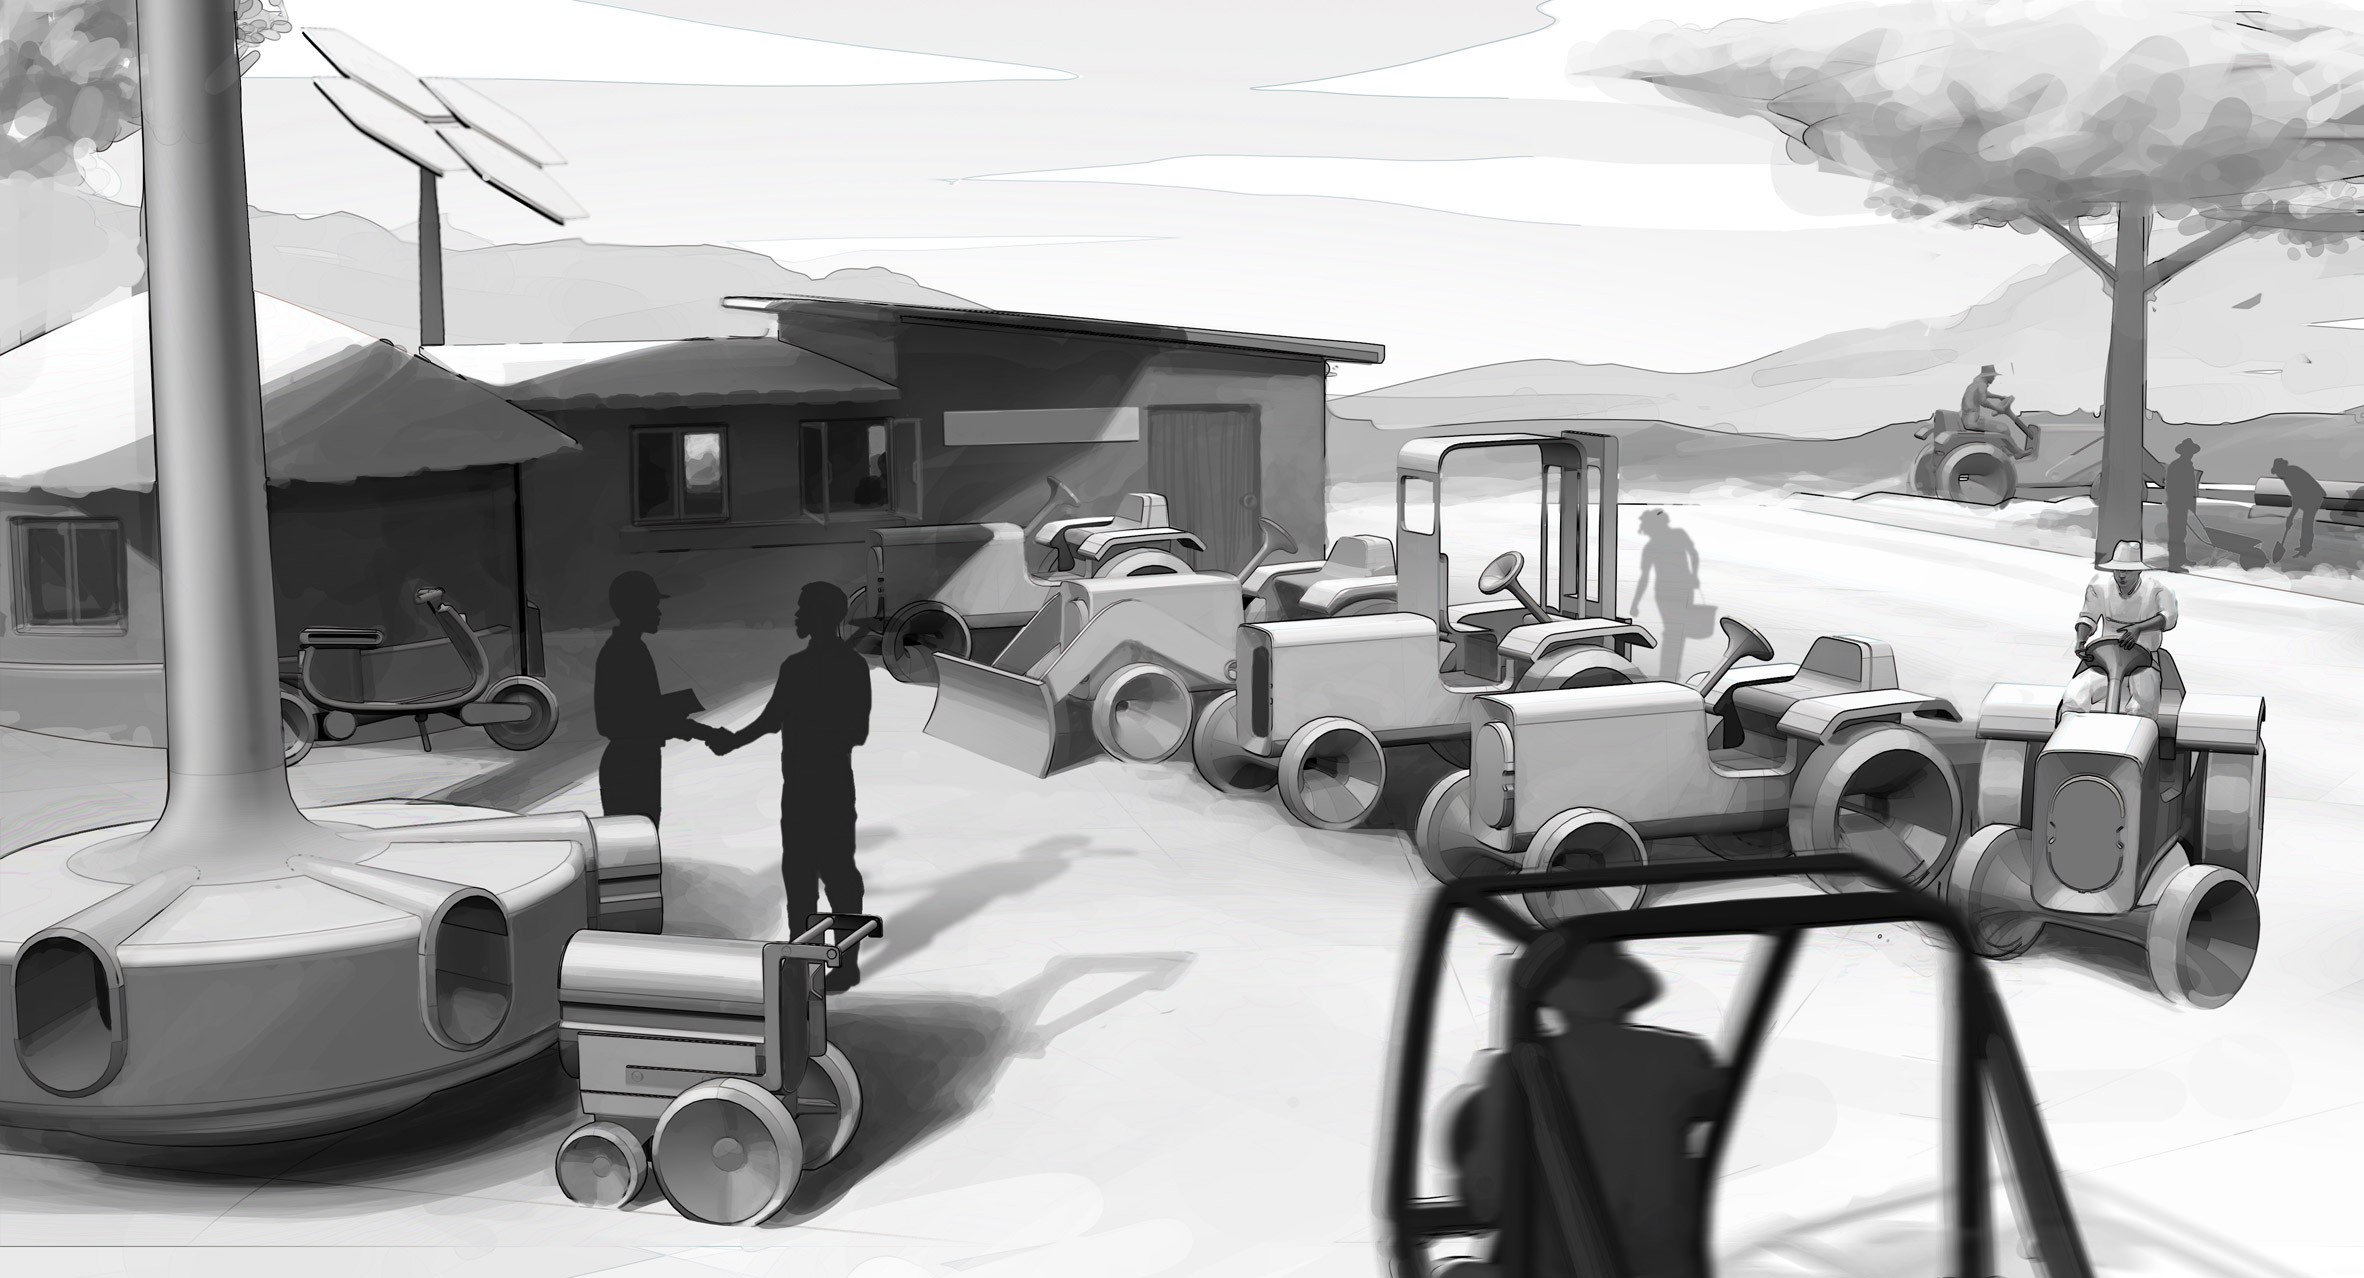 AMO and Volkswagen designing an electric tractor for sub-Saharan Africa